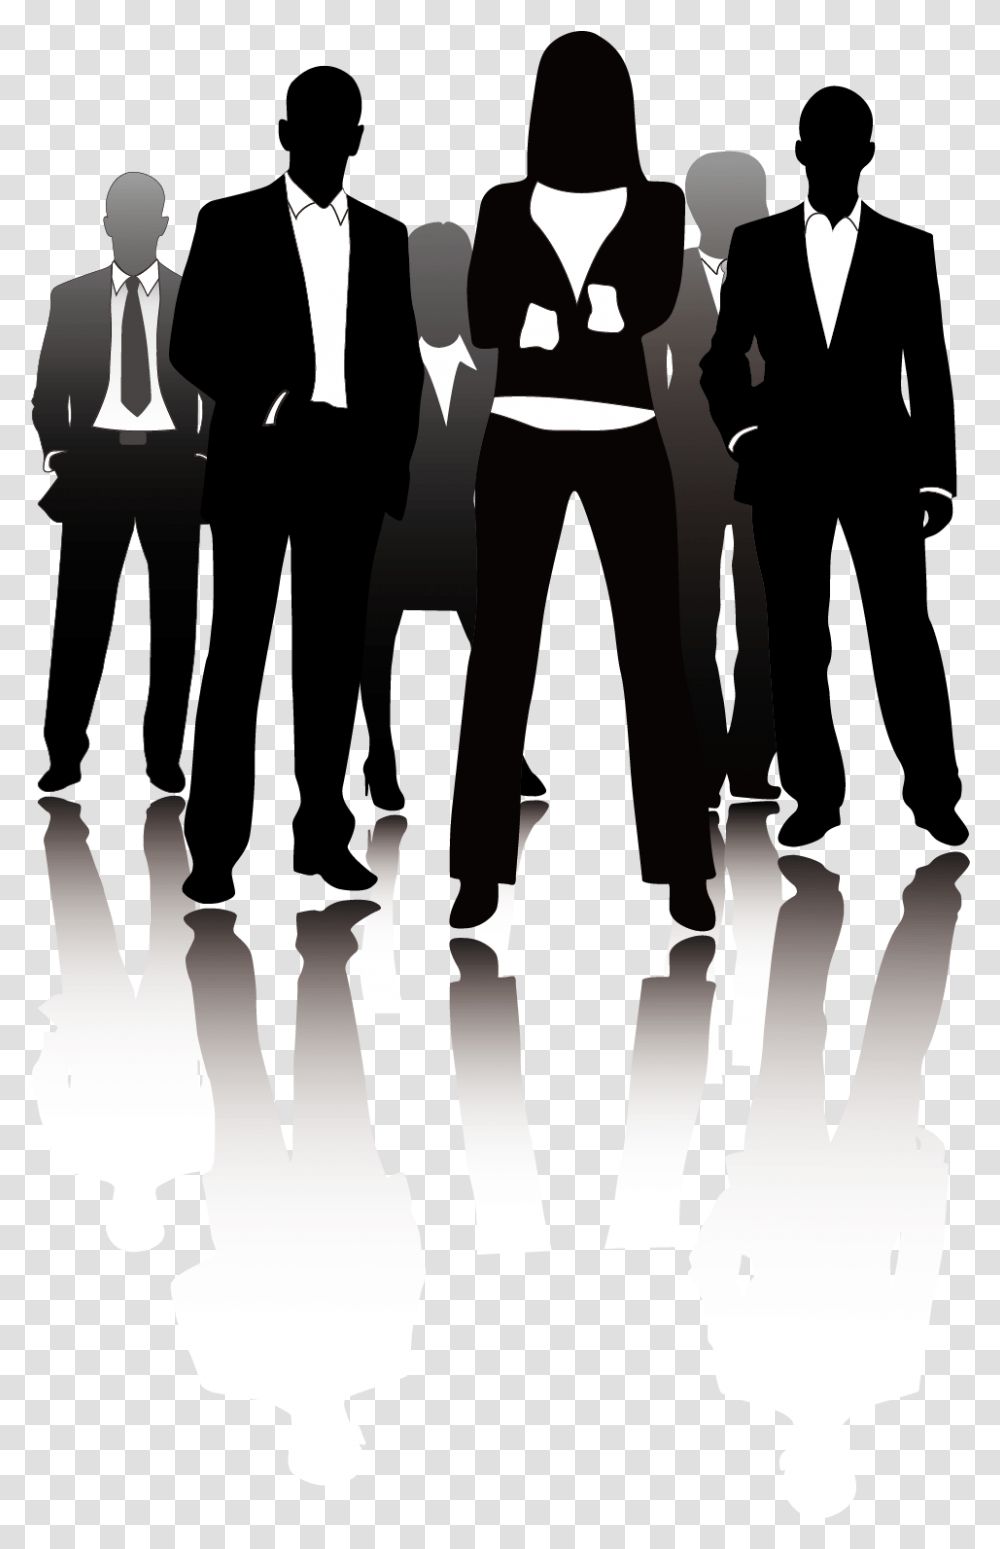 Consultant Business Management Consulting Firm Consultant Silhouette, Person, People, Clothing, Crowd Transparent Png